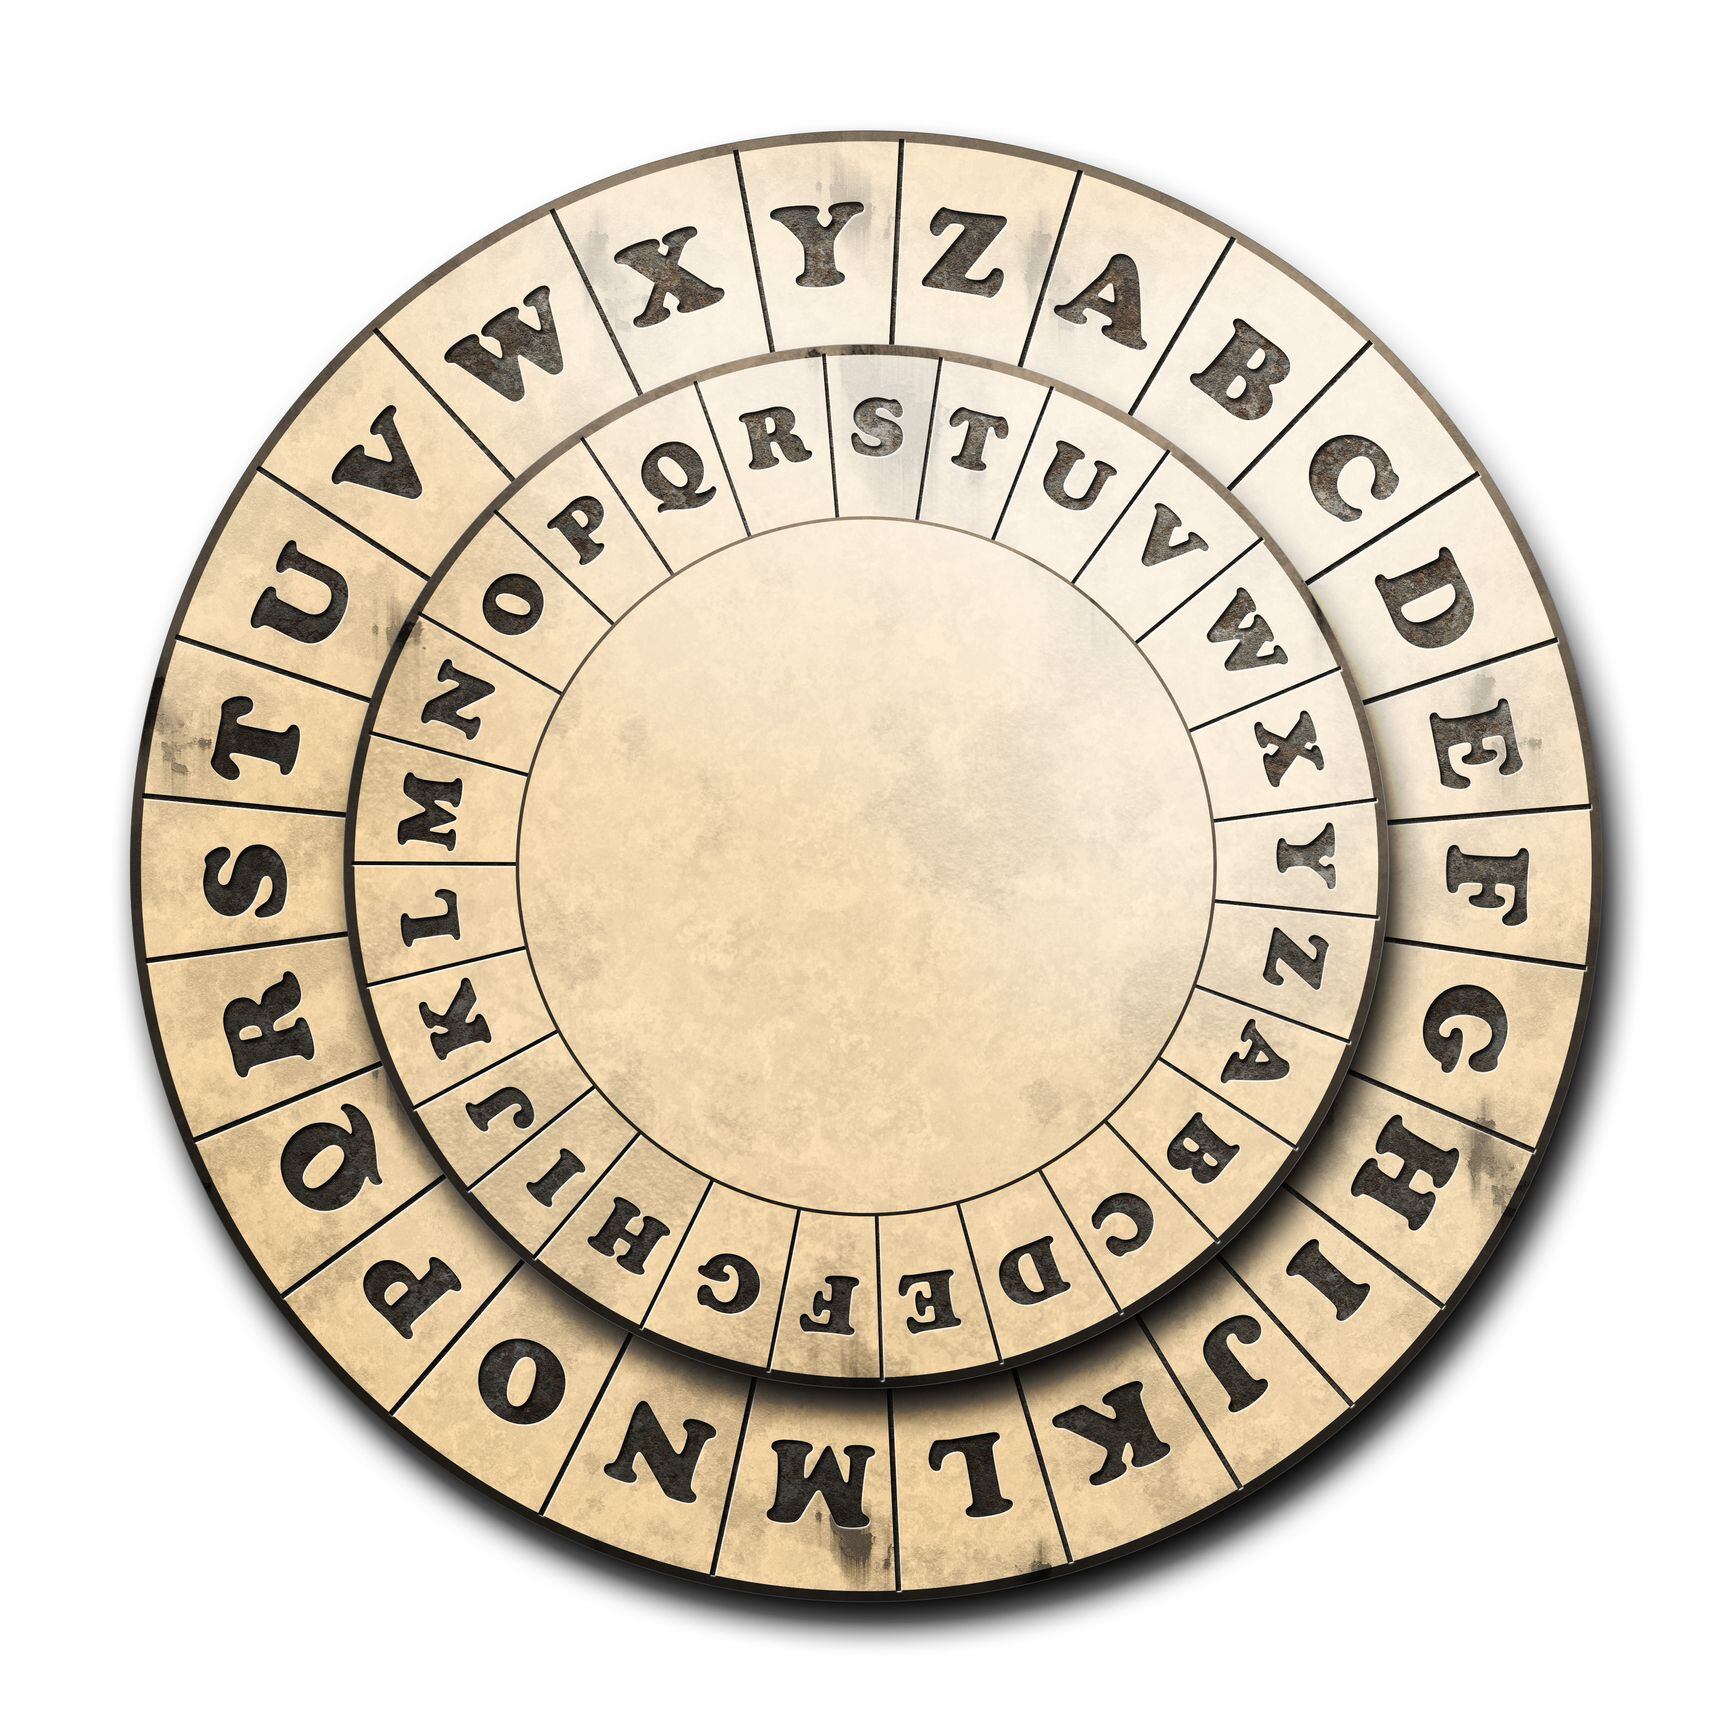 Caesar Cipher wheel for Cryptography